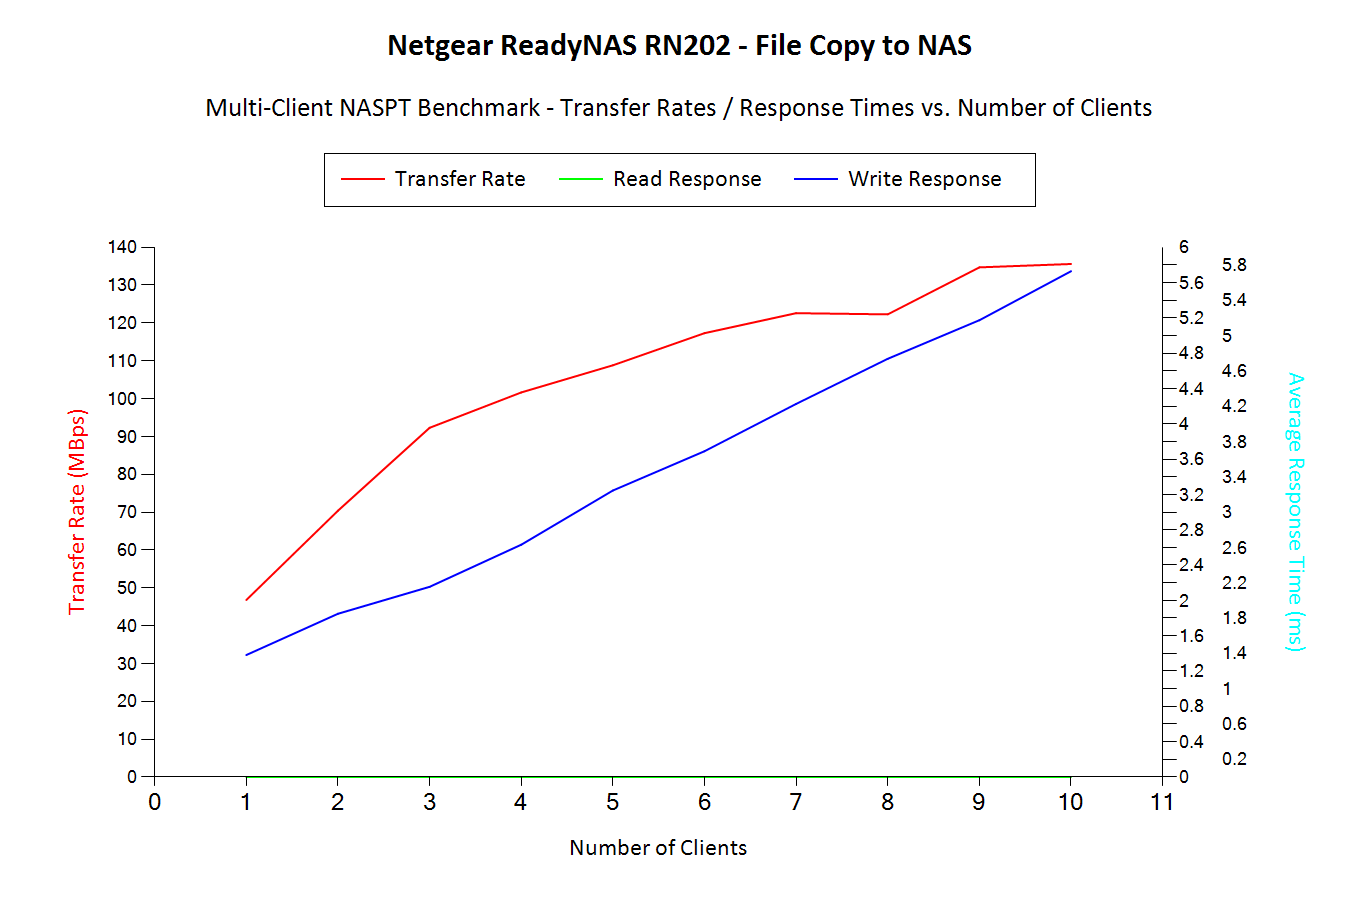 File Copy to NAS - Multi-Client Benchmark